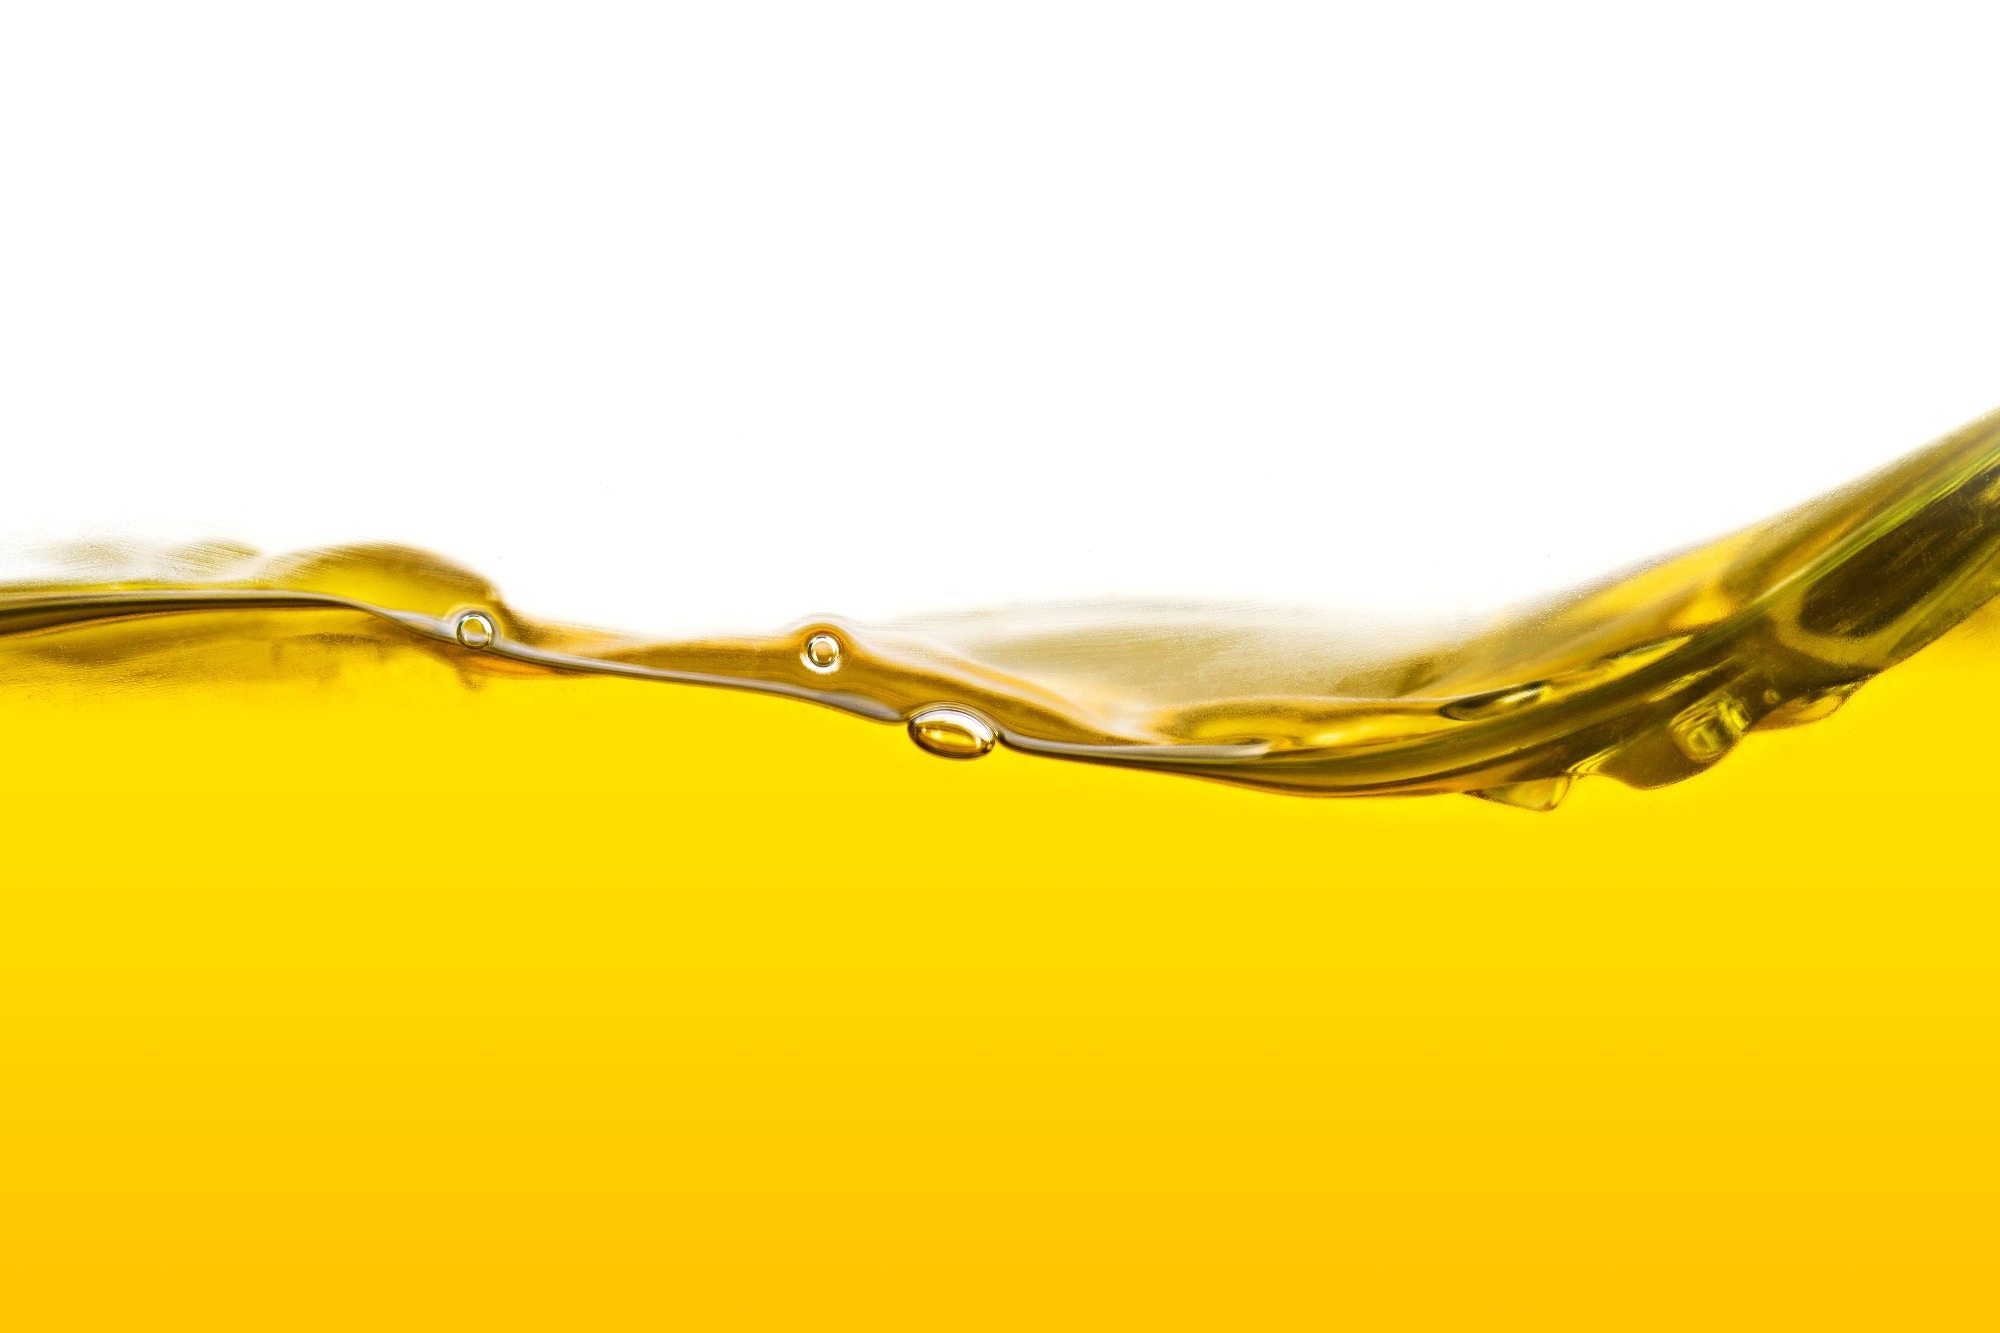 Study: A probabilistic health risk assessment of potentially toxic elements in edible vegetable oils consumed in Hamadan, Iran. Image Credit: Naypong Studio/Shutterstock.com